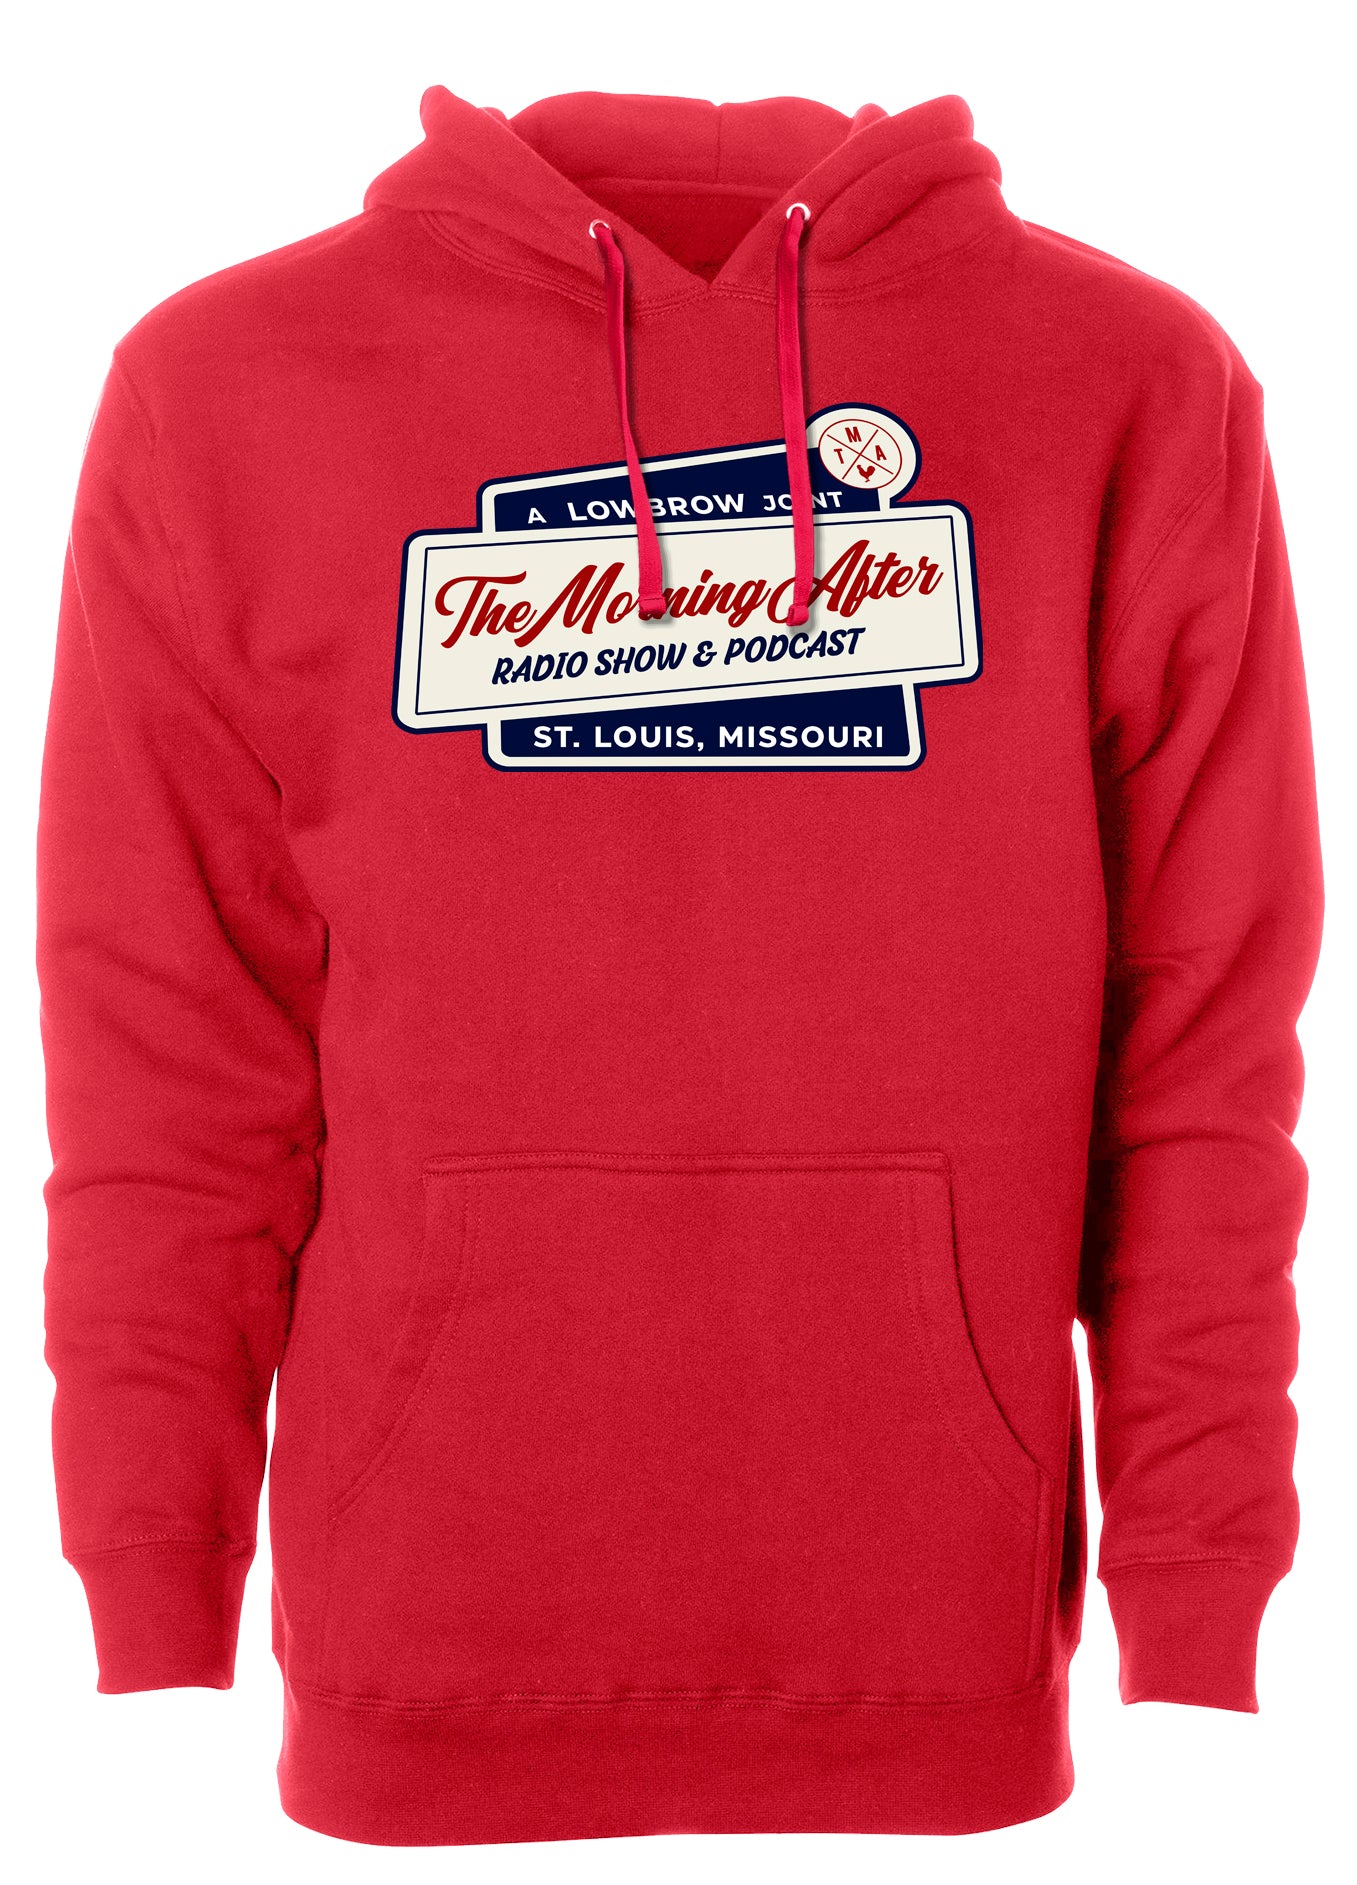 lowbrow joint the morning after hoodie sweatshirt st louis missouri cardinal tma cardinal red